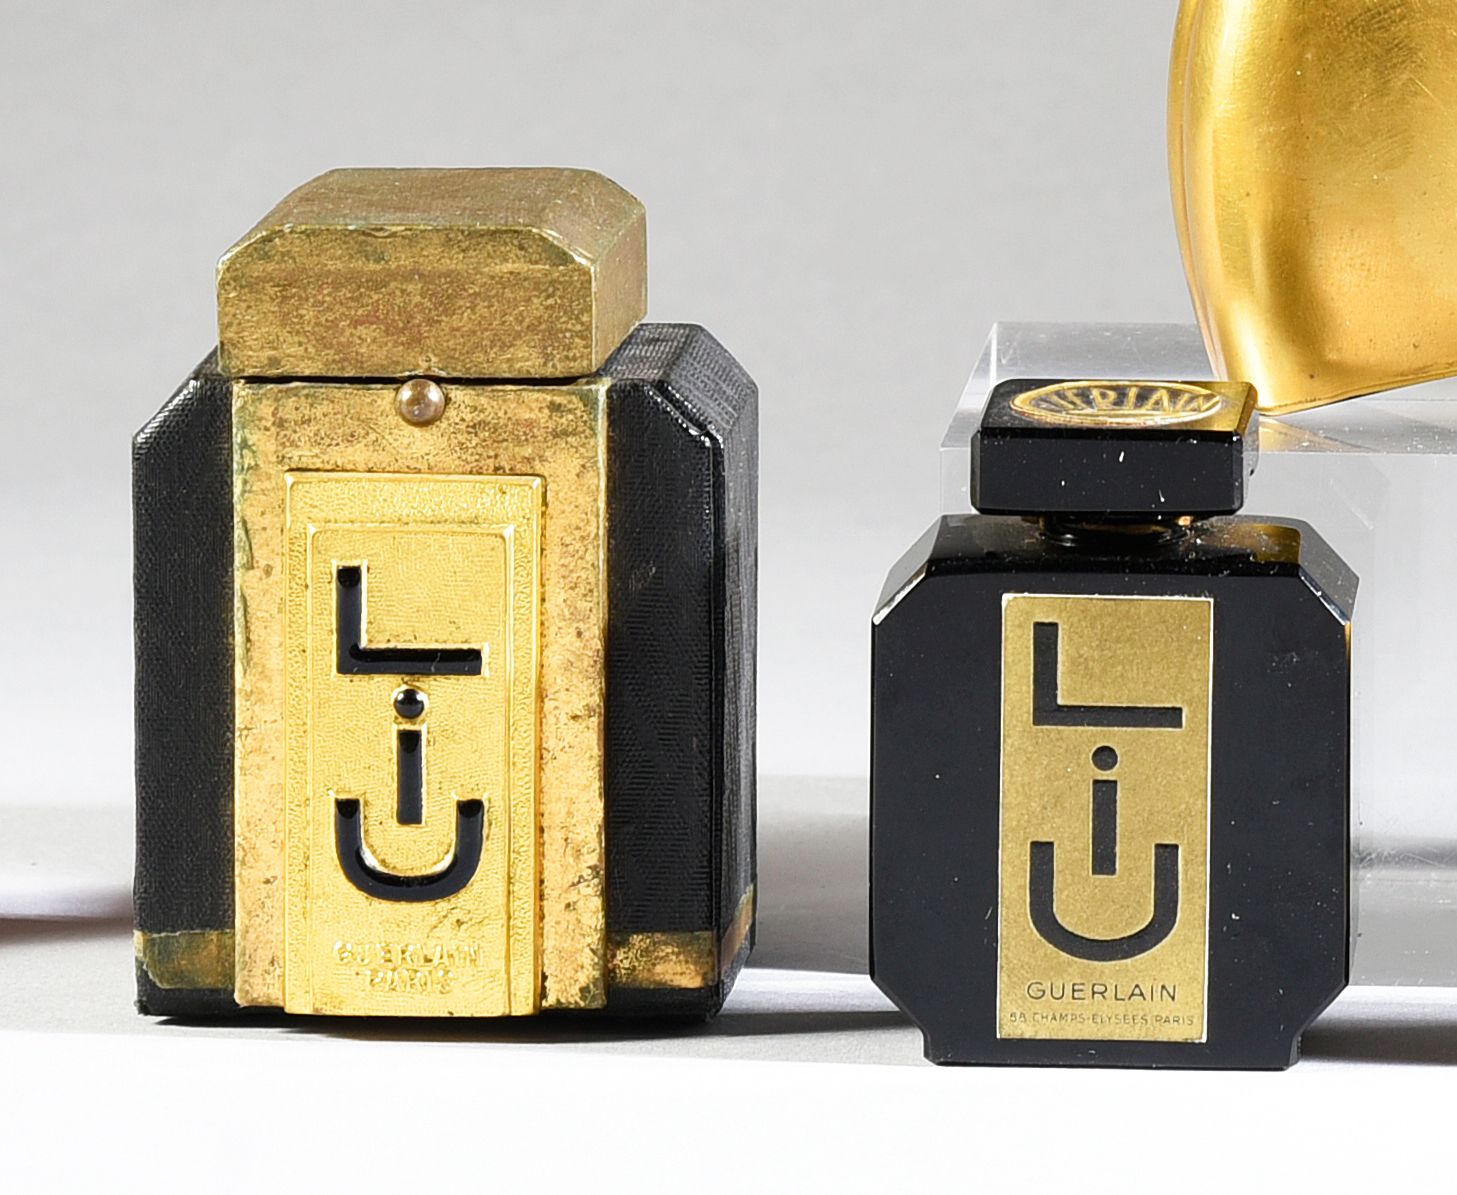 GUERLAIN - «Liu» - (1928) 
Presented in its poplar box sheathed in gold and blac&hellip;